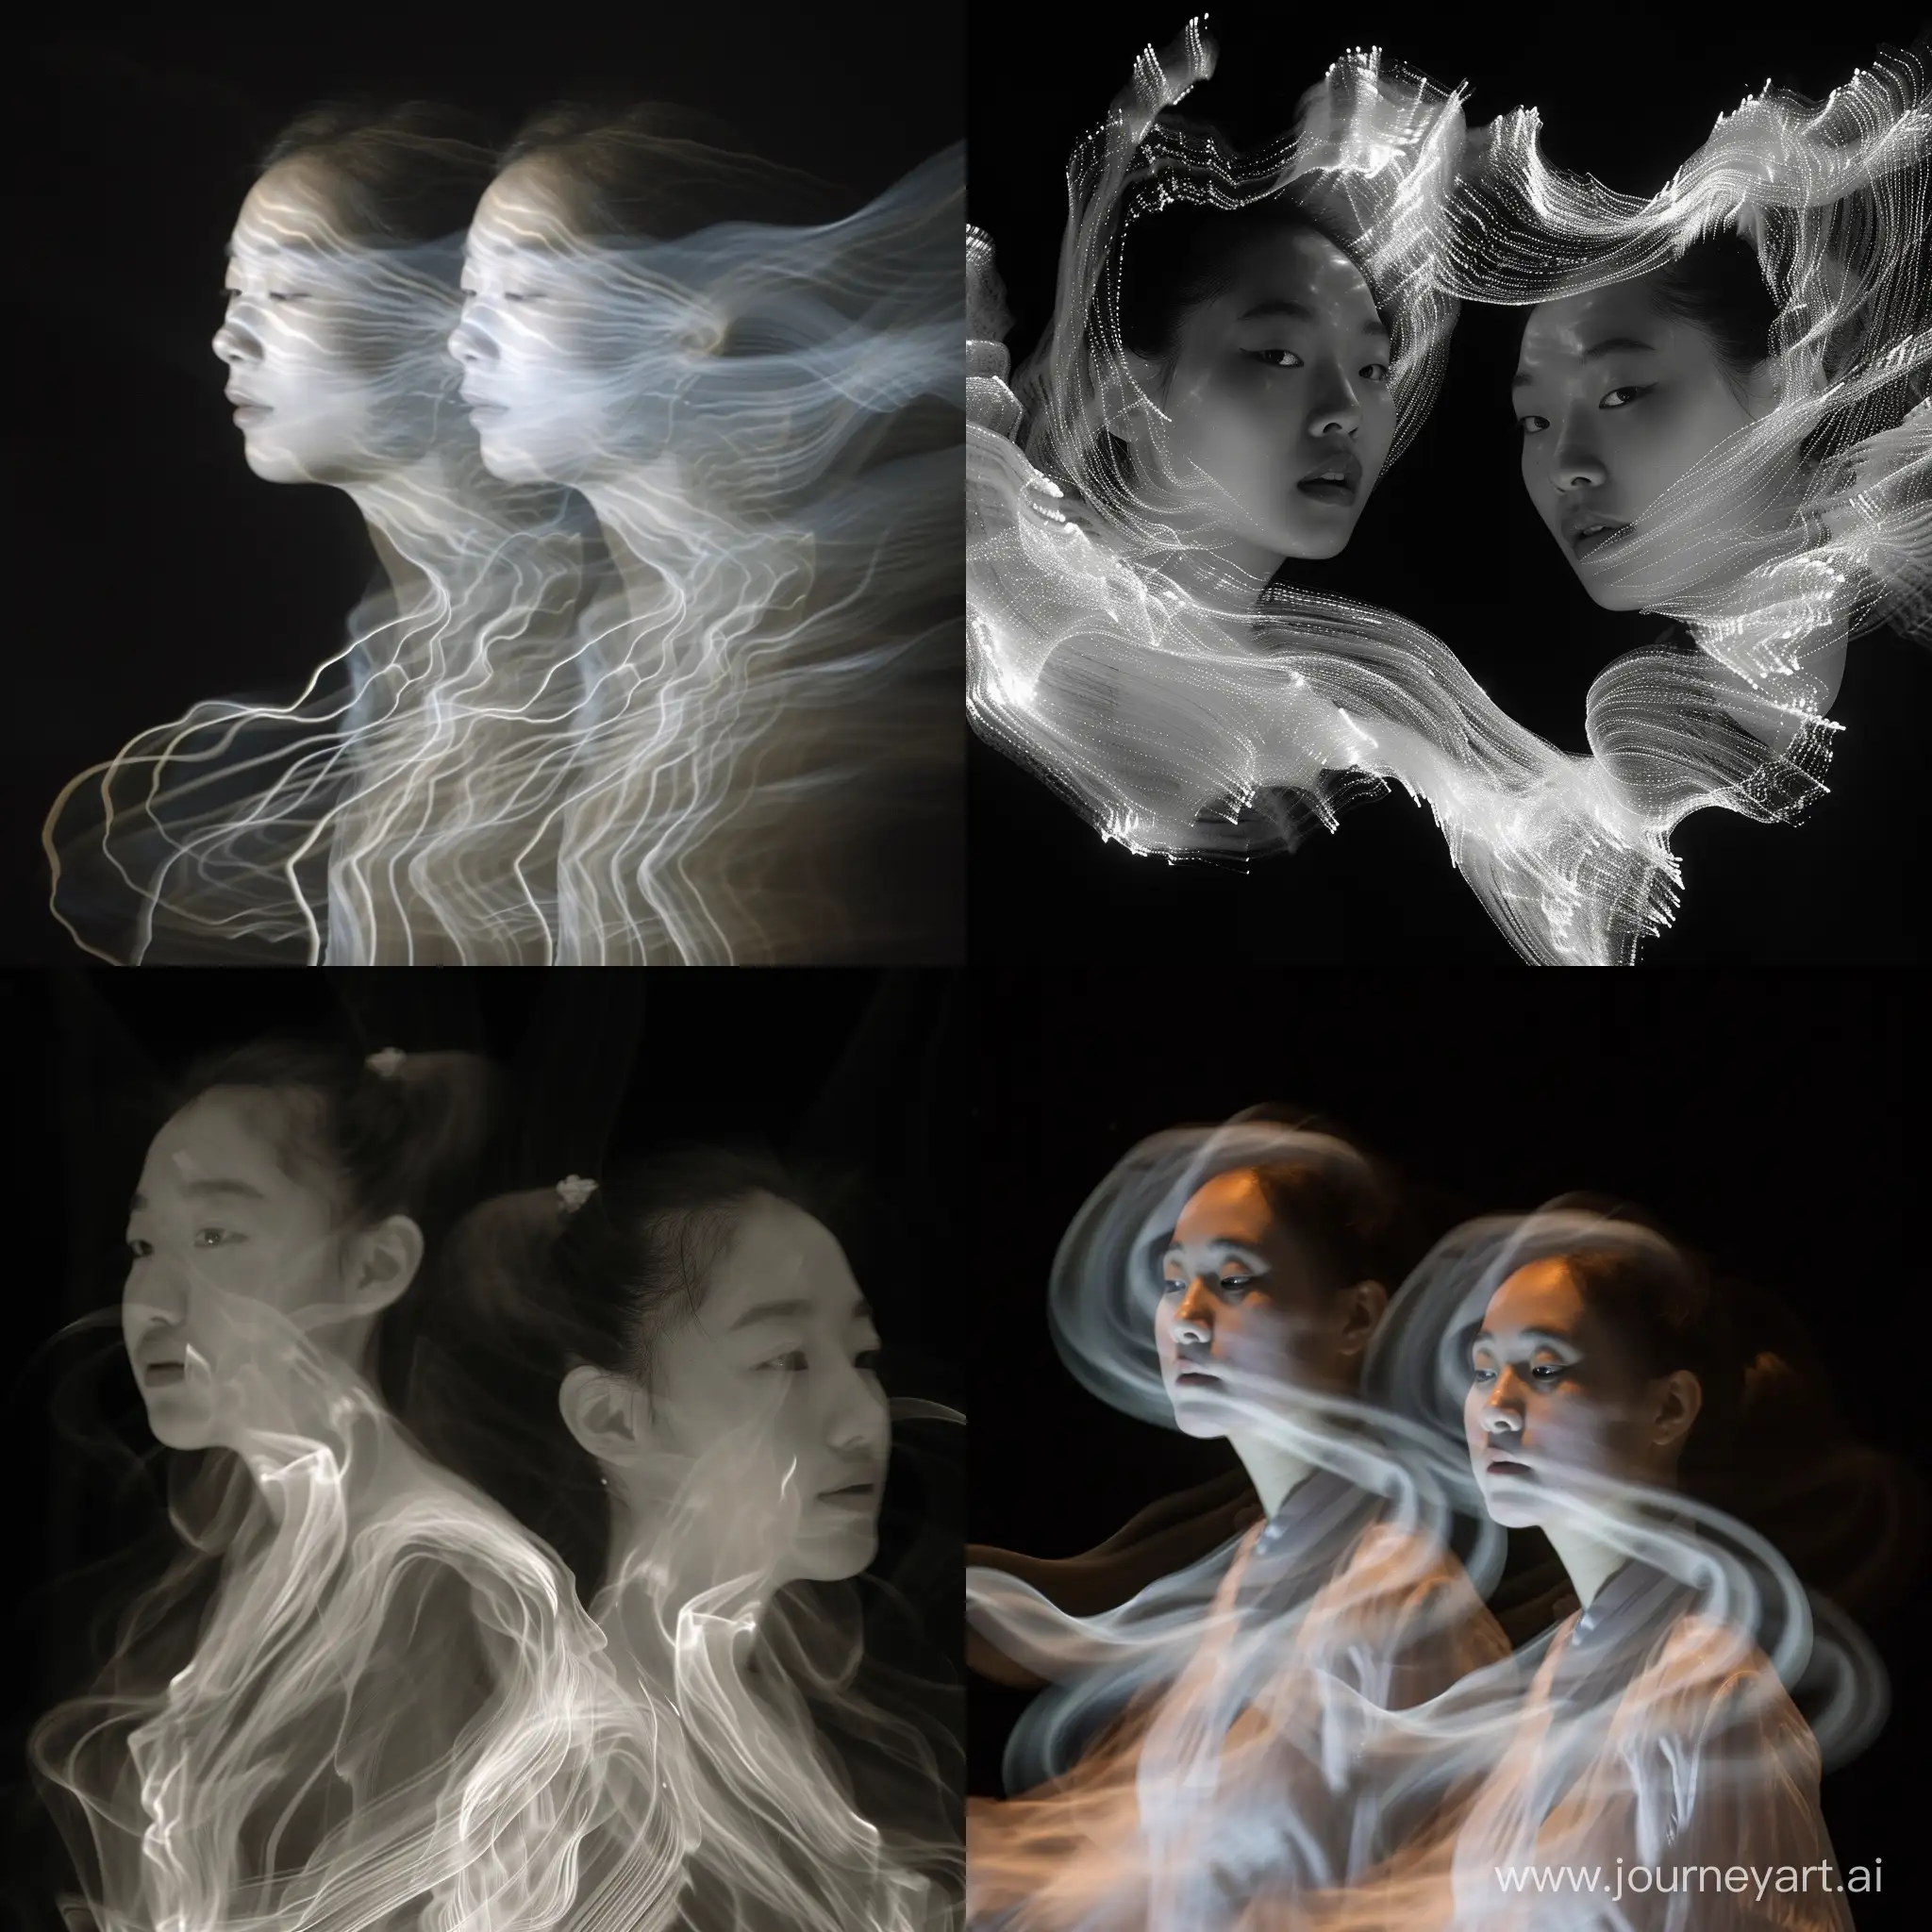 two light dancing girls in the image of rivers, their movements are light weightless, the girls' faces are Asian, their facial features are proud and majestic